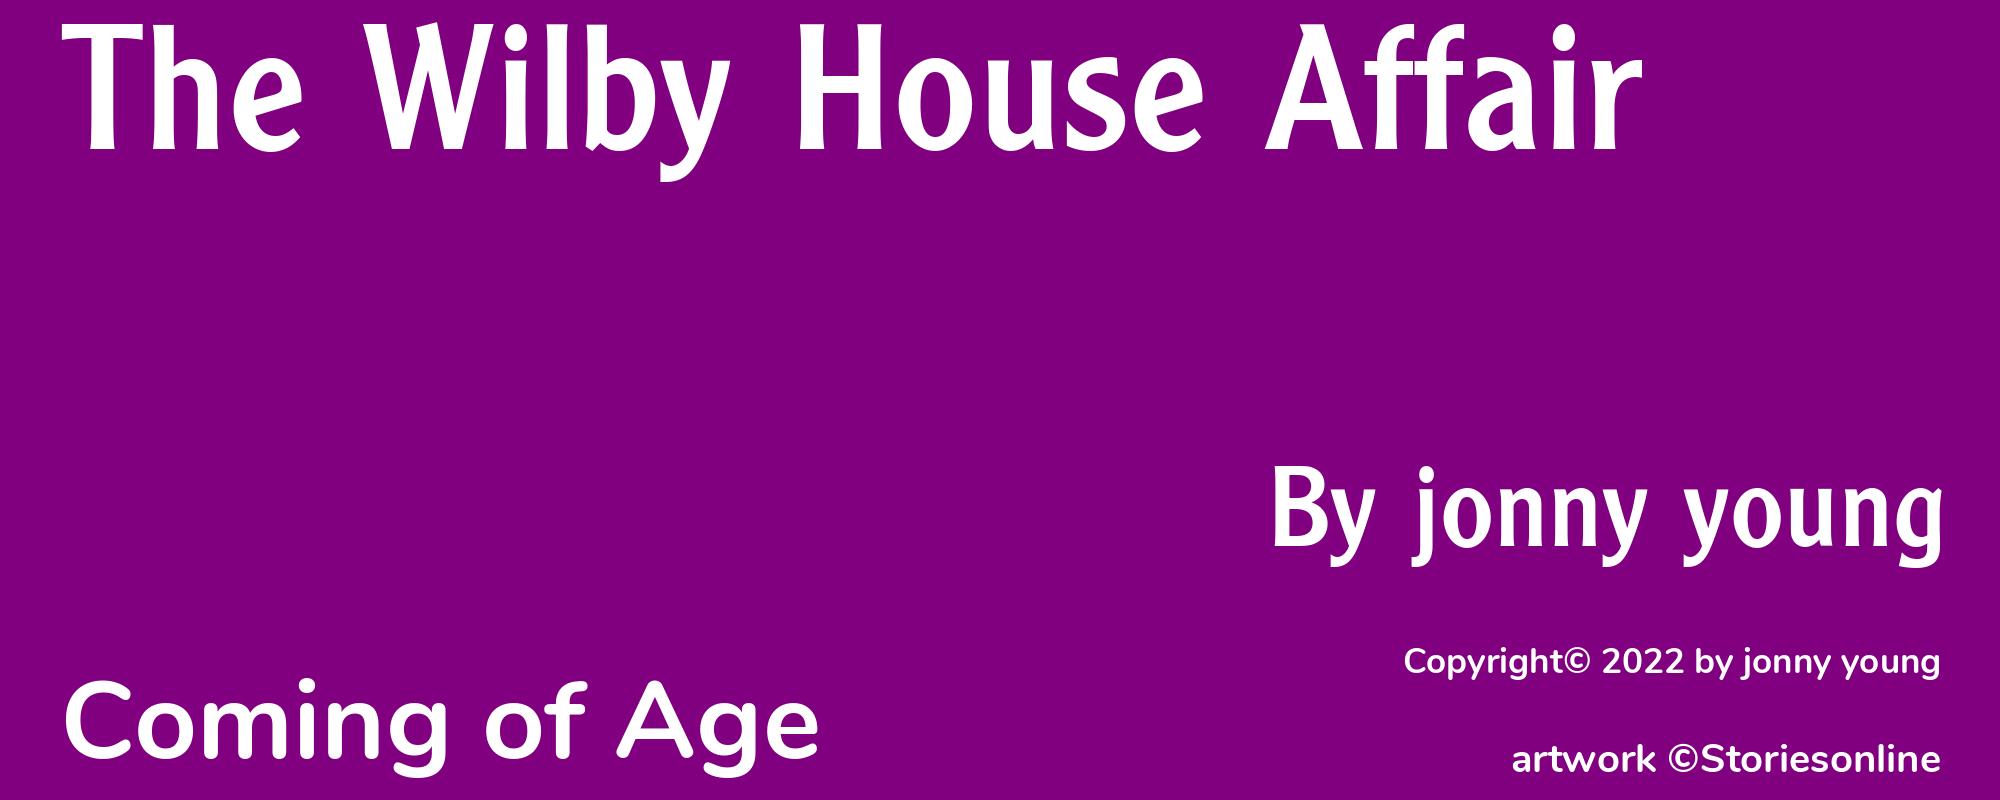 The Wilby House Affair - Cover